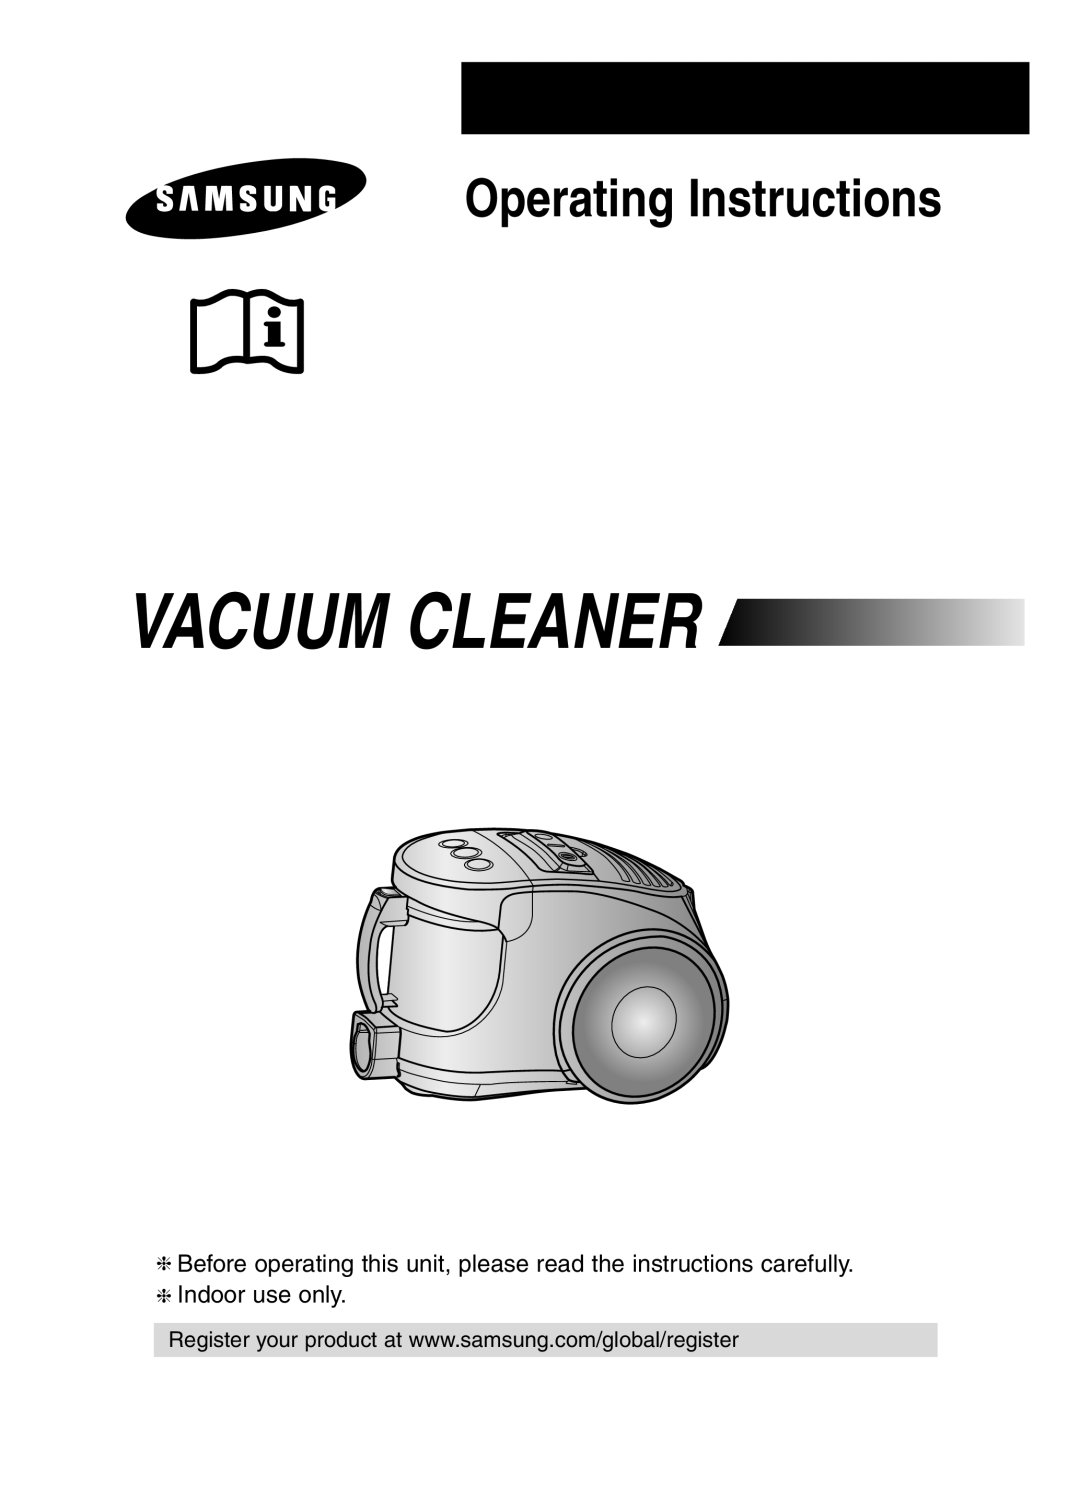 Samsung SC8431 operating instructions Indoor use only, Vacuum Cleaner, Operating Instructions 